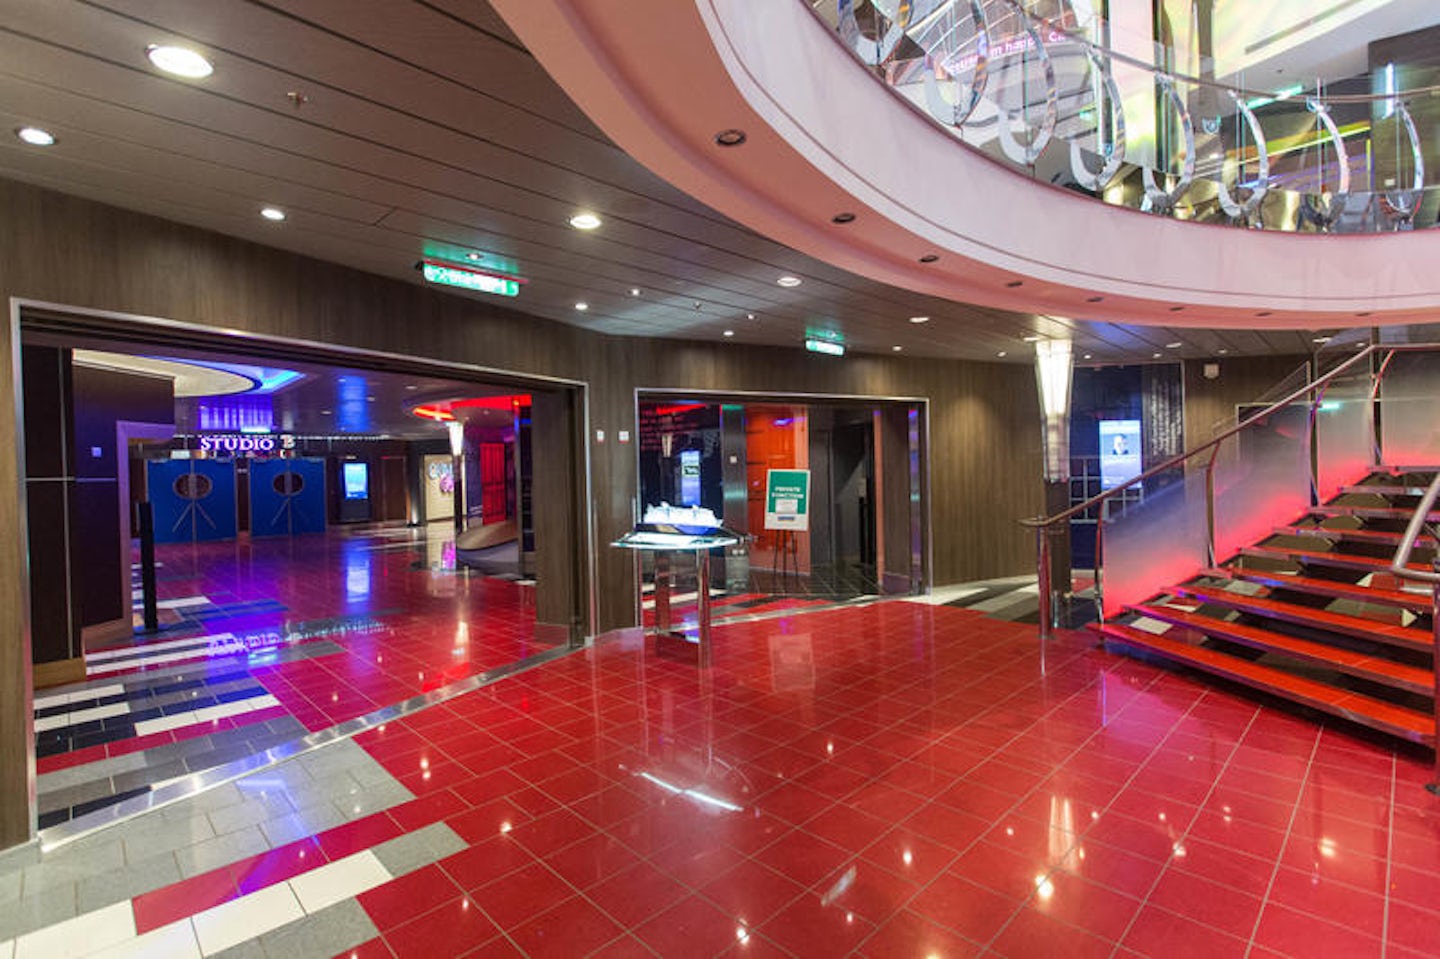 Entertainment Place on Harmony of the Seas